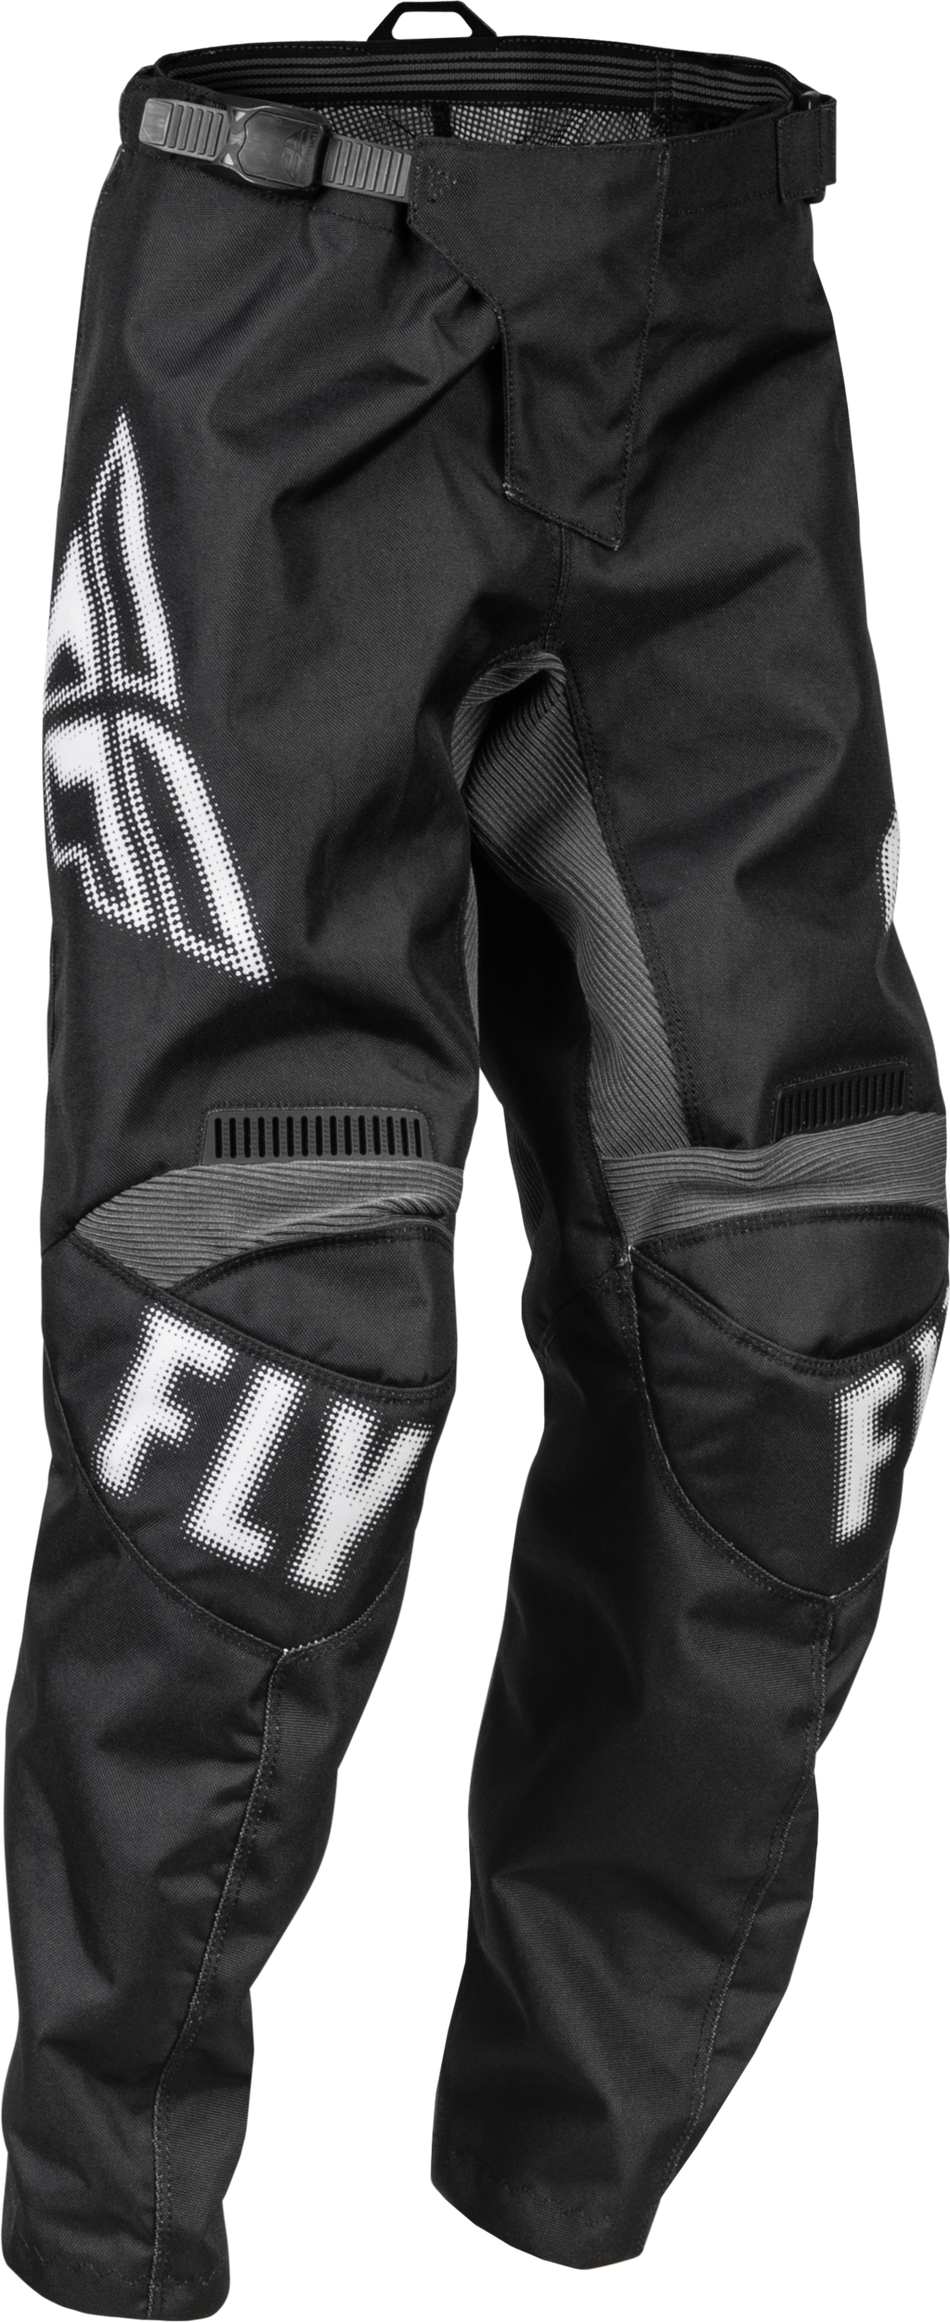 FLY RACING Youth F-16 Pants Black/White Sz 24 376-23224